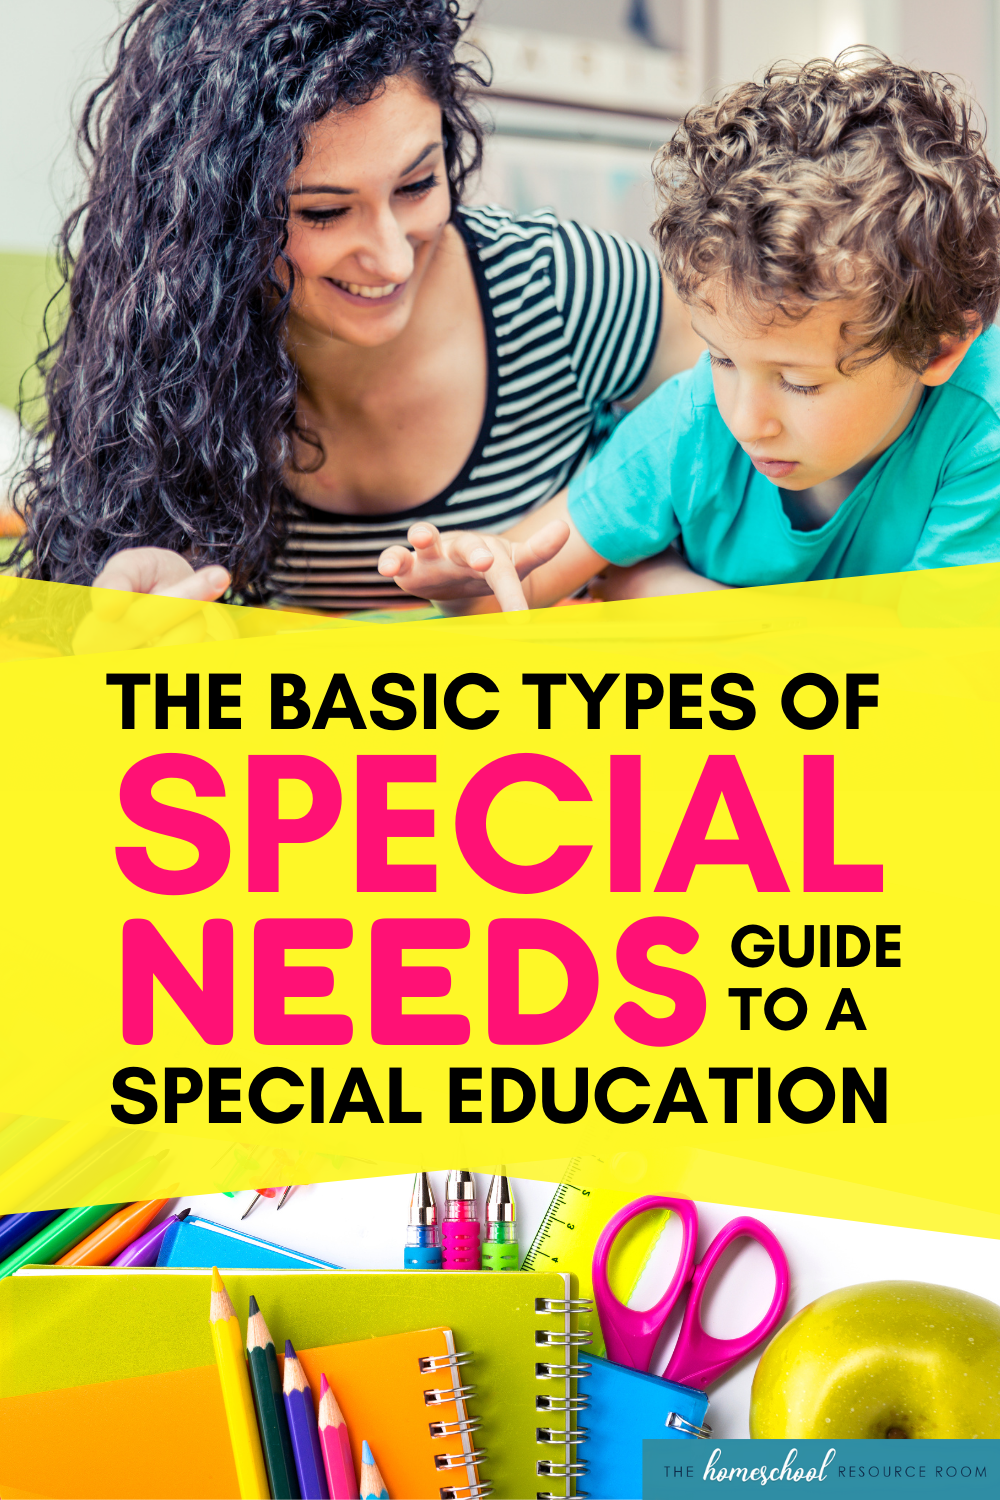 Types of Special Needs: A guide to understanding special education.